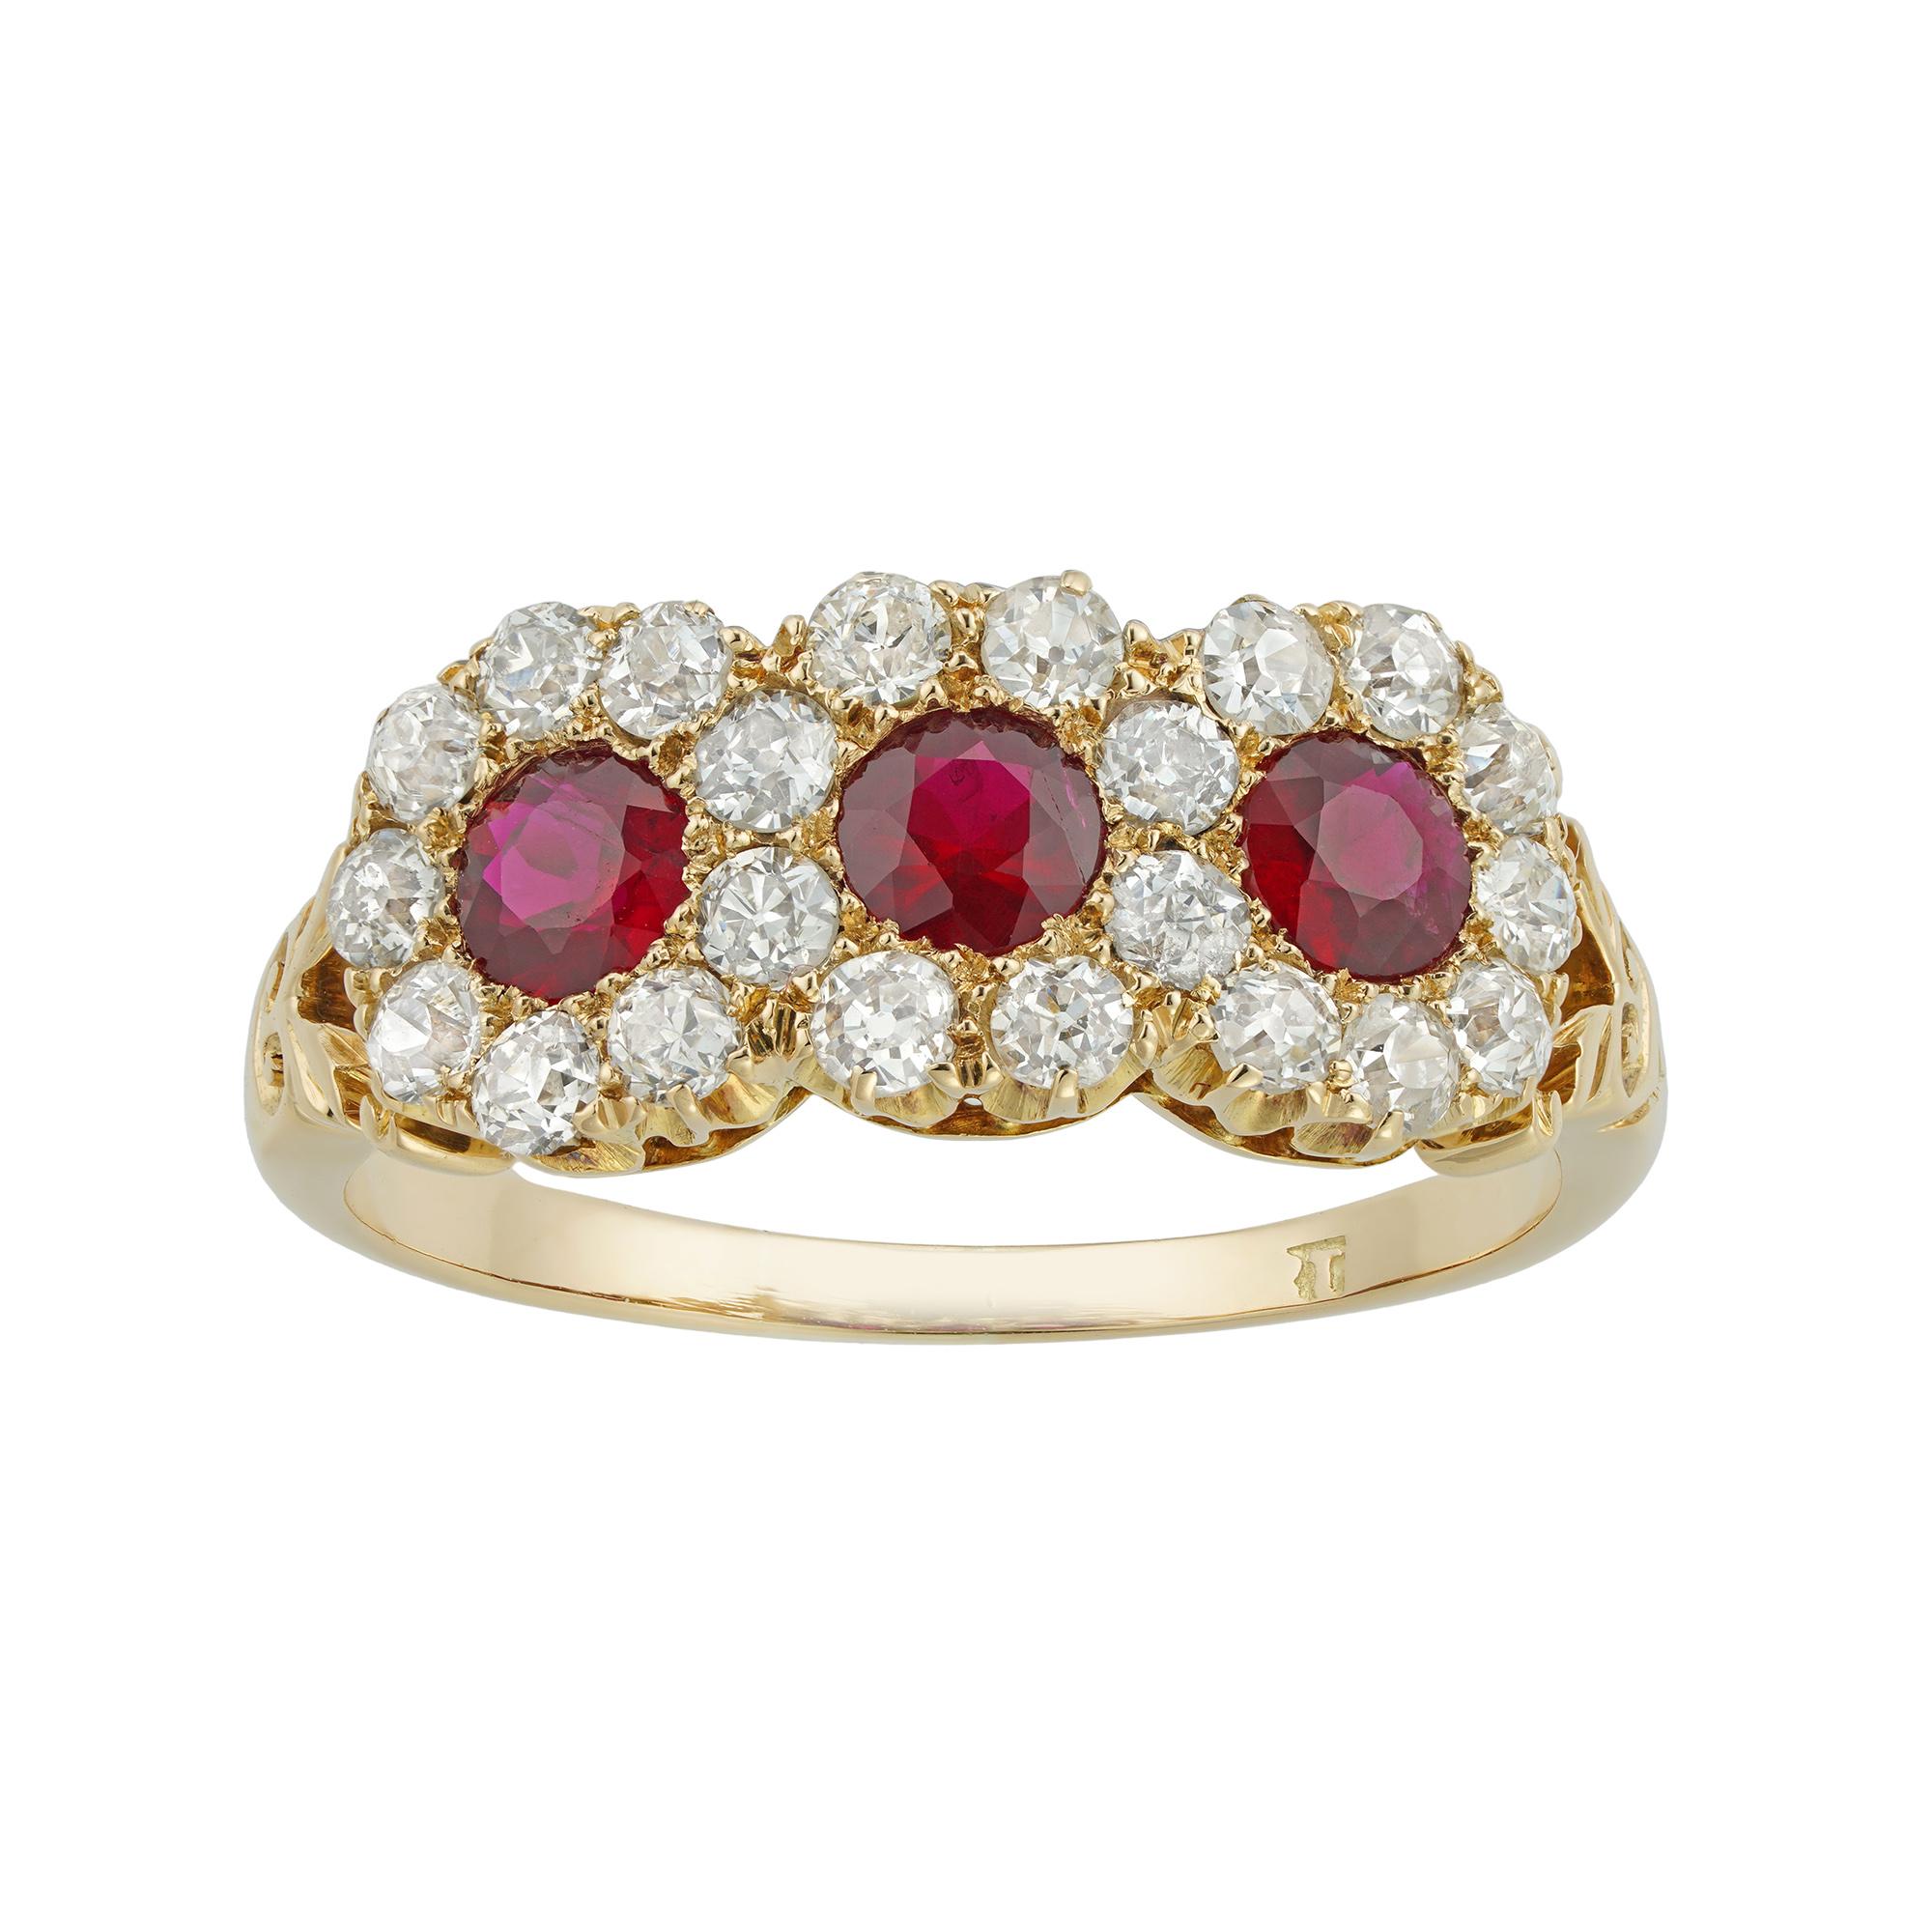 Antique Cushion Cut Victorian Ruby and Diamond Triple Cluster Ring